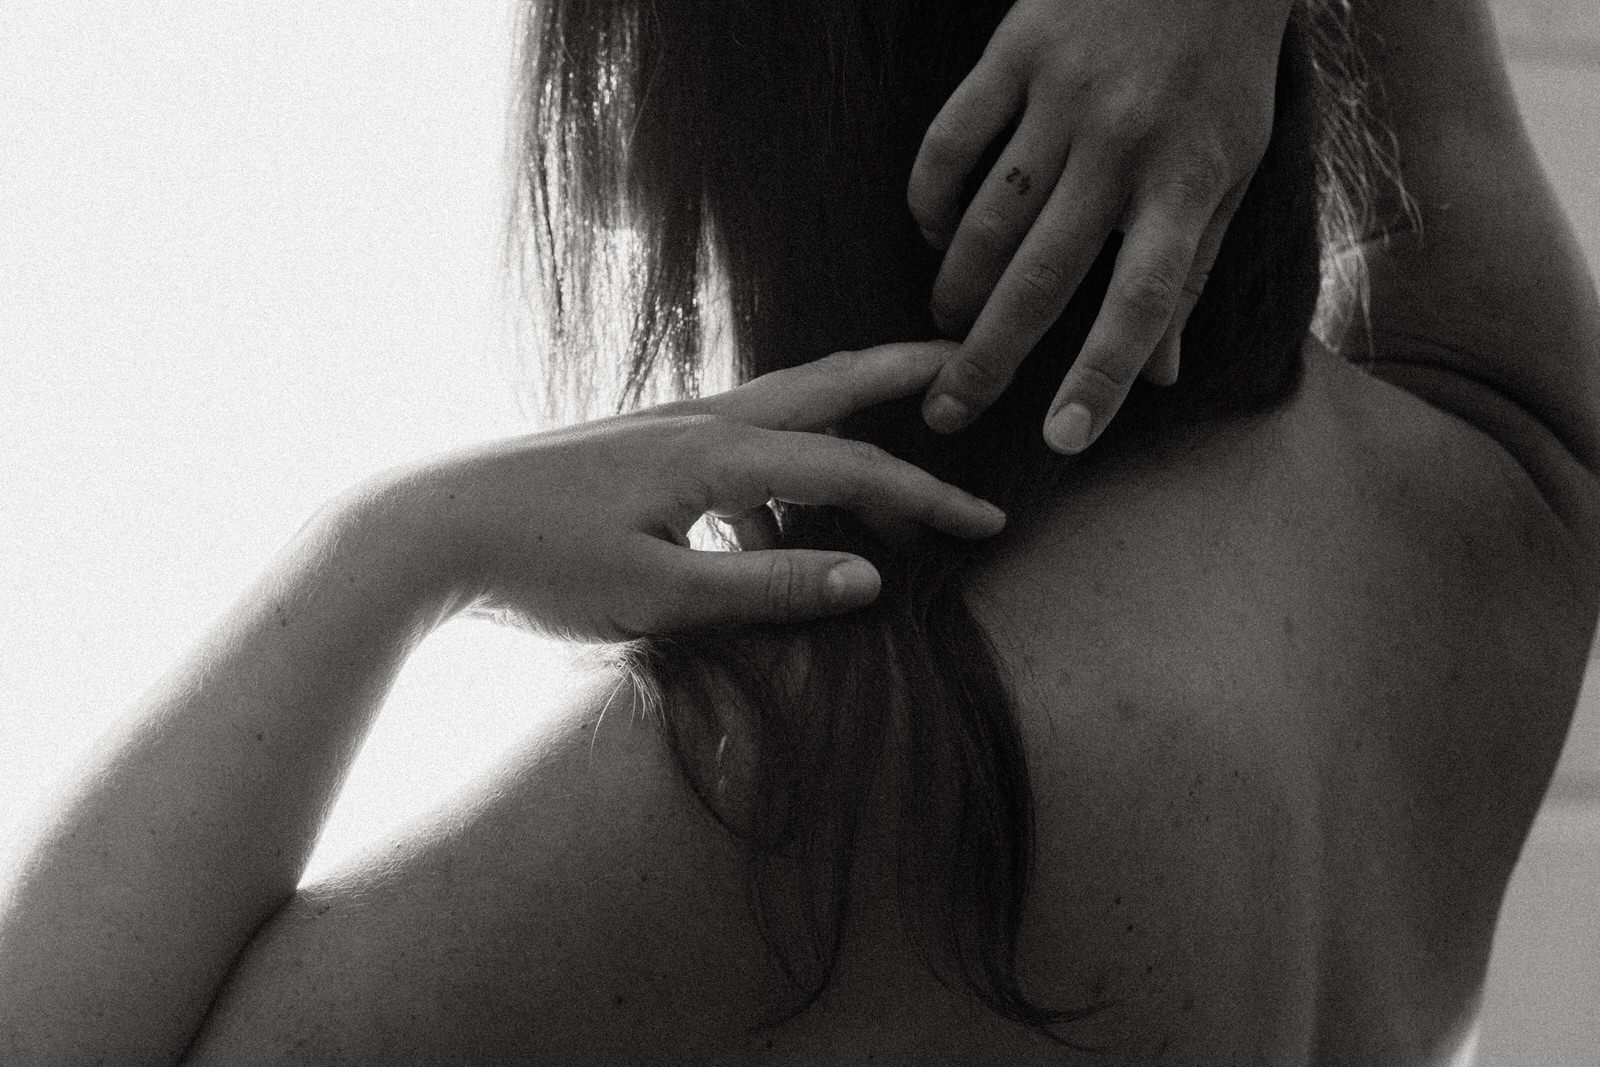 woman's fingers touching by her naked shoulder